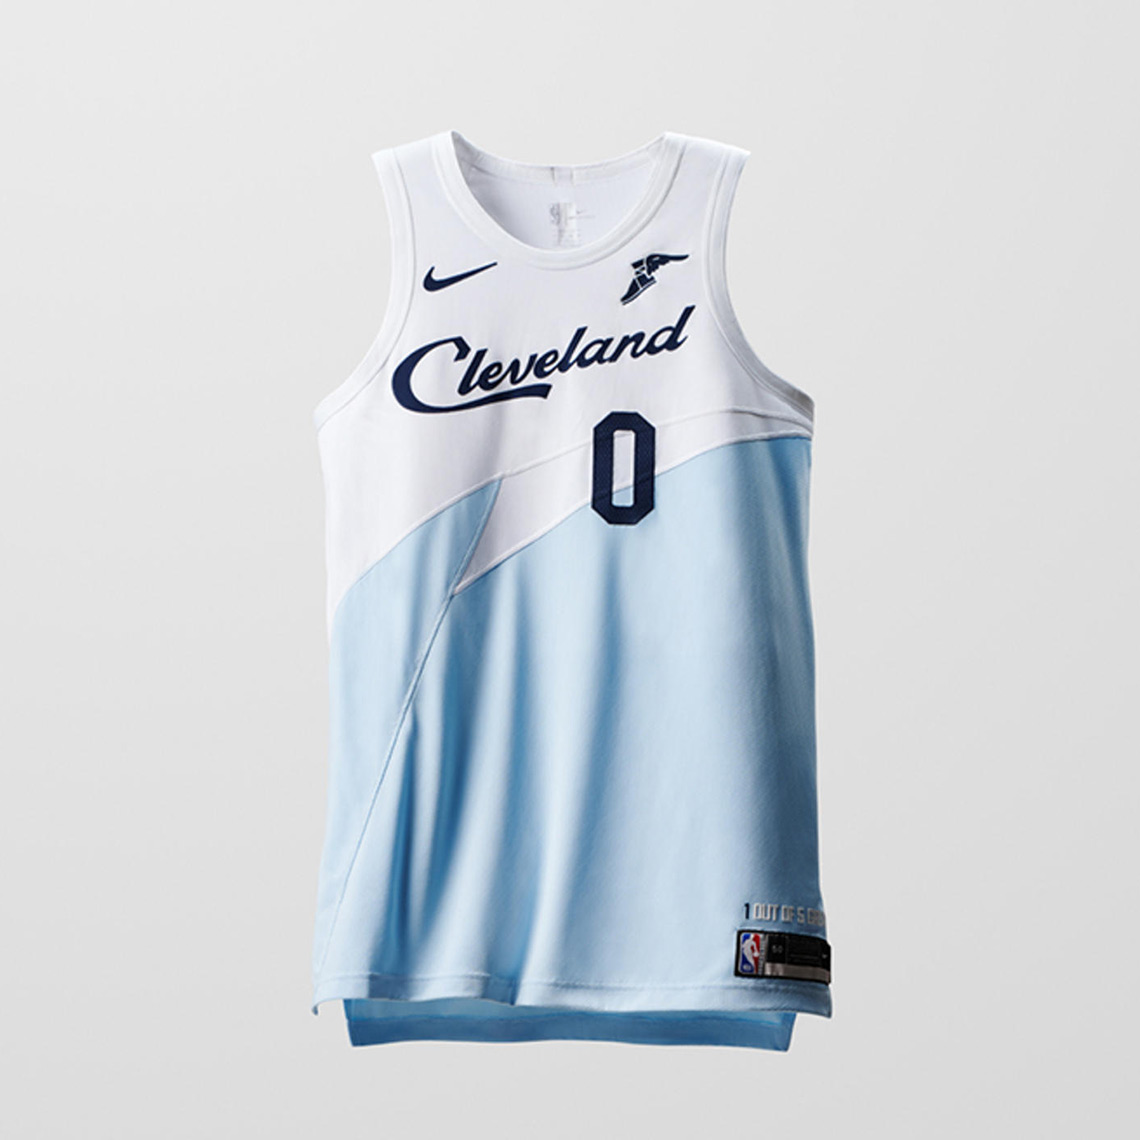 How to Edit NBA/NIKE Jersey Pattern/Cut for Sublimation 